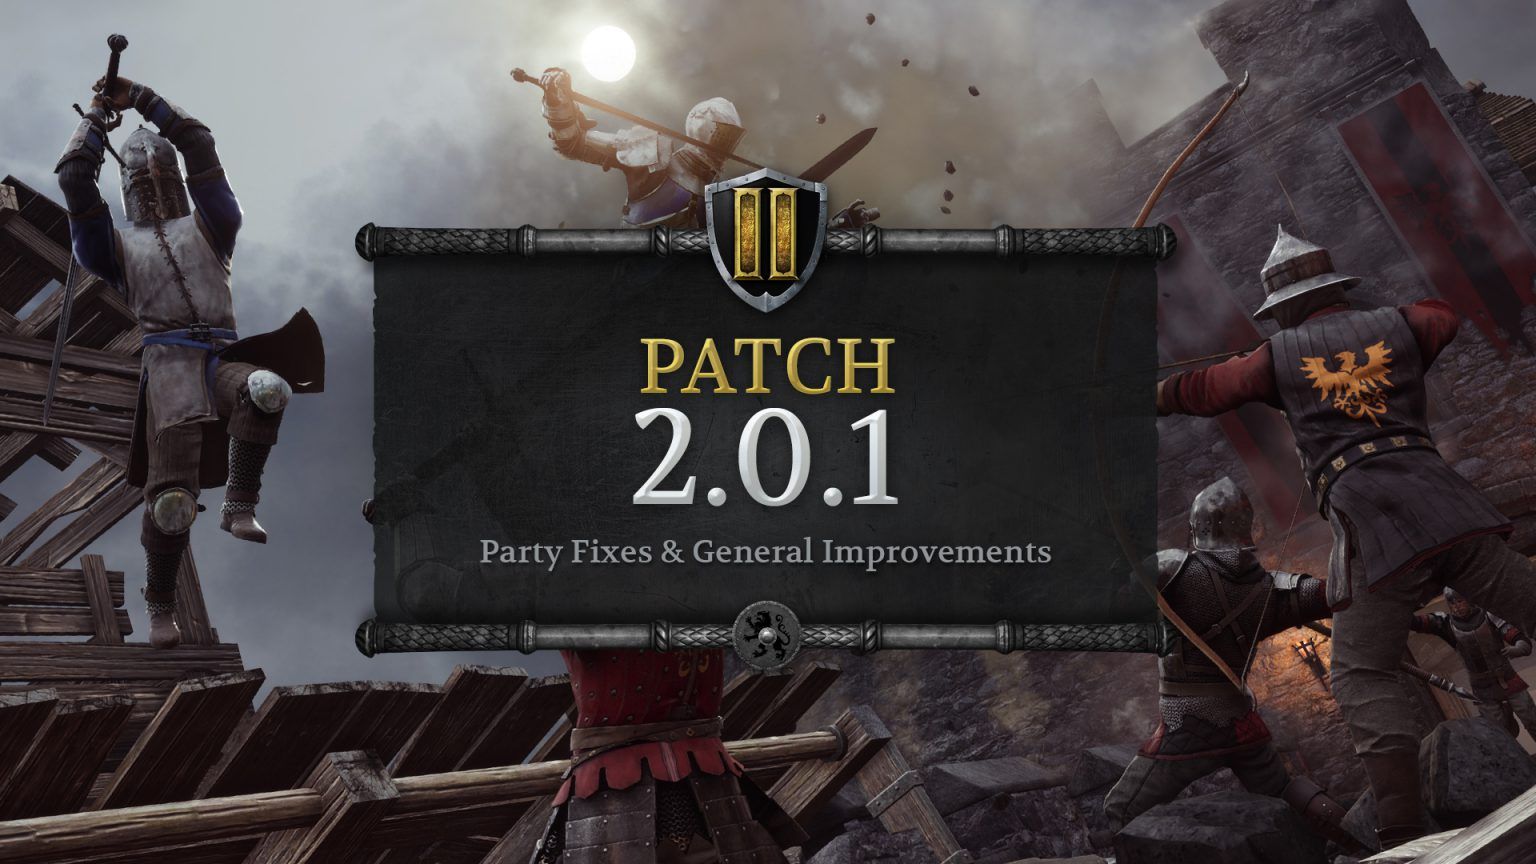 Chivalry 2 Update Today (July 22) - Release Time, Patch Notes 2.0.1